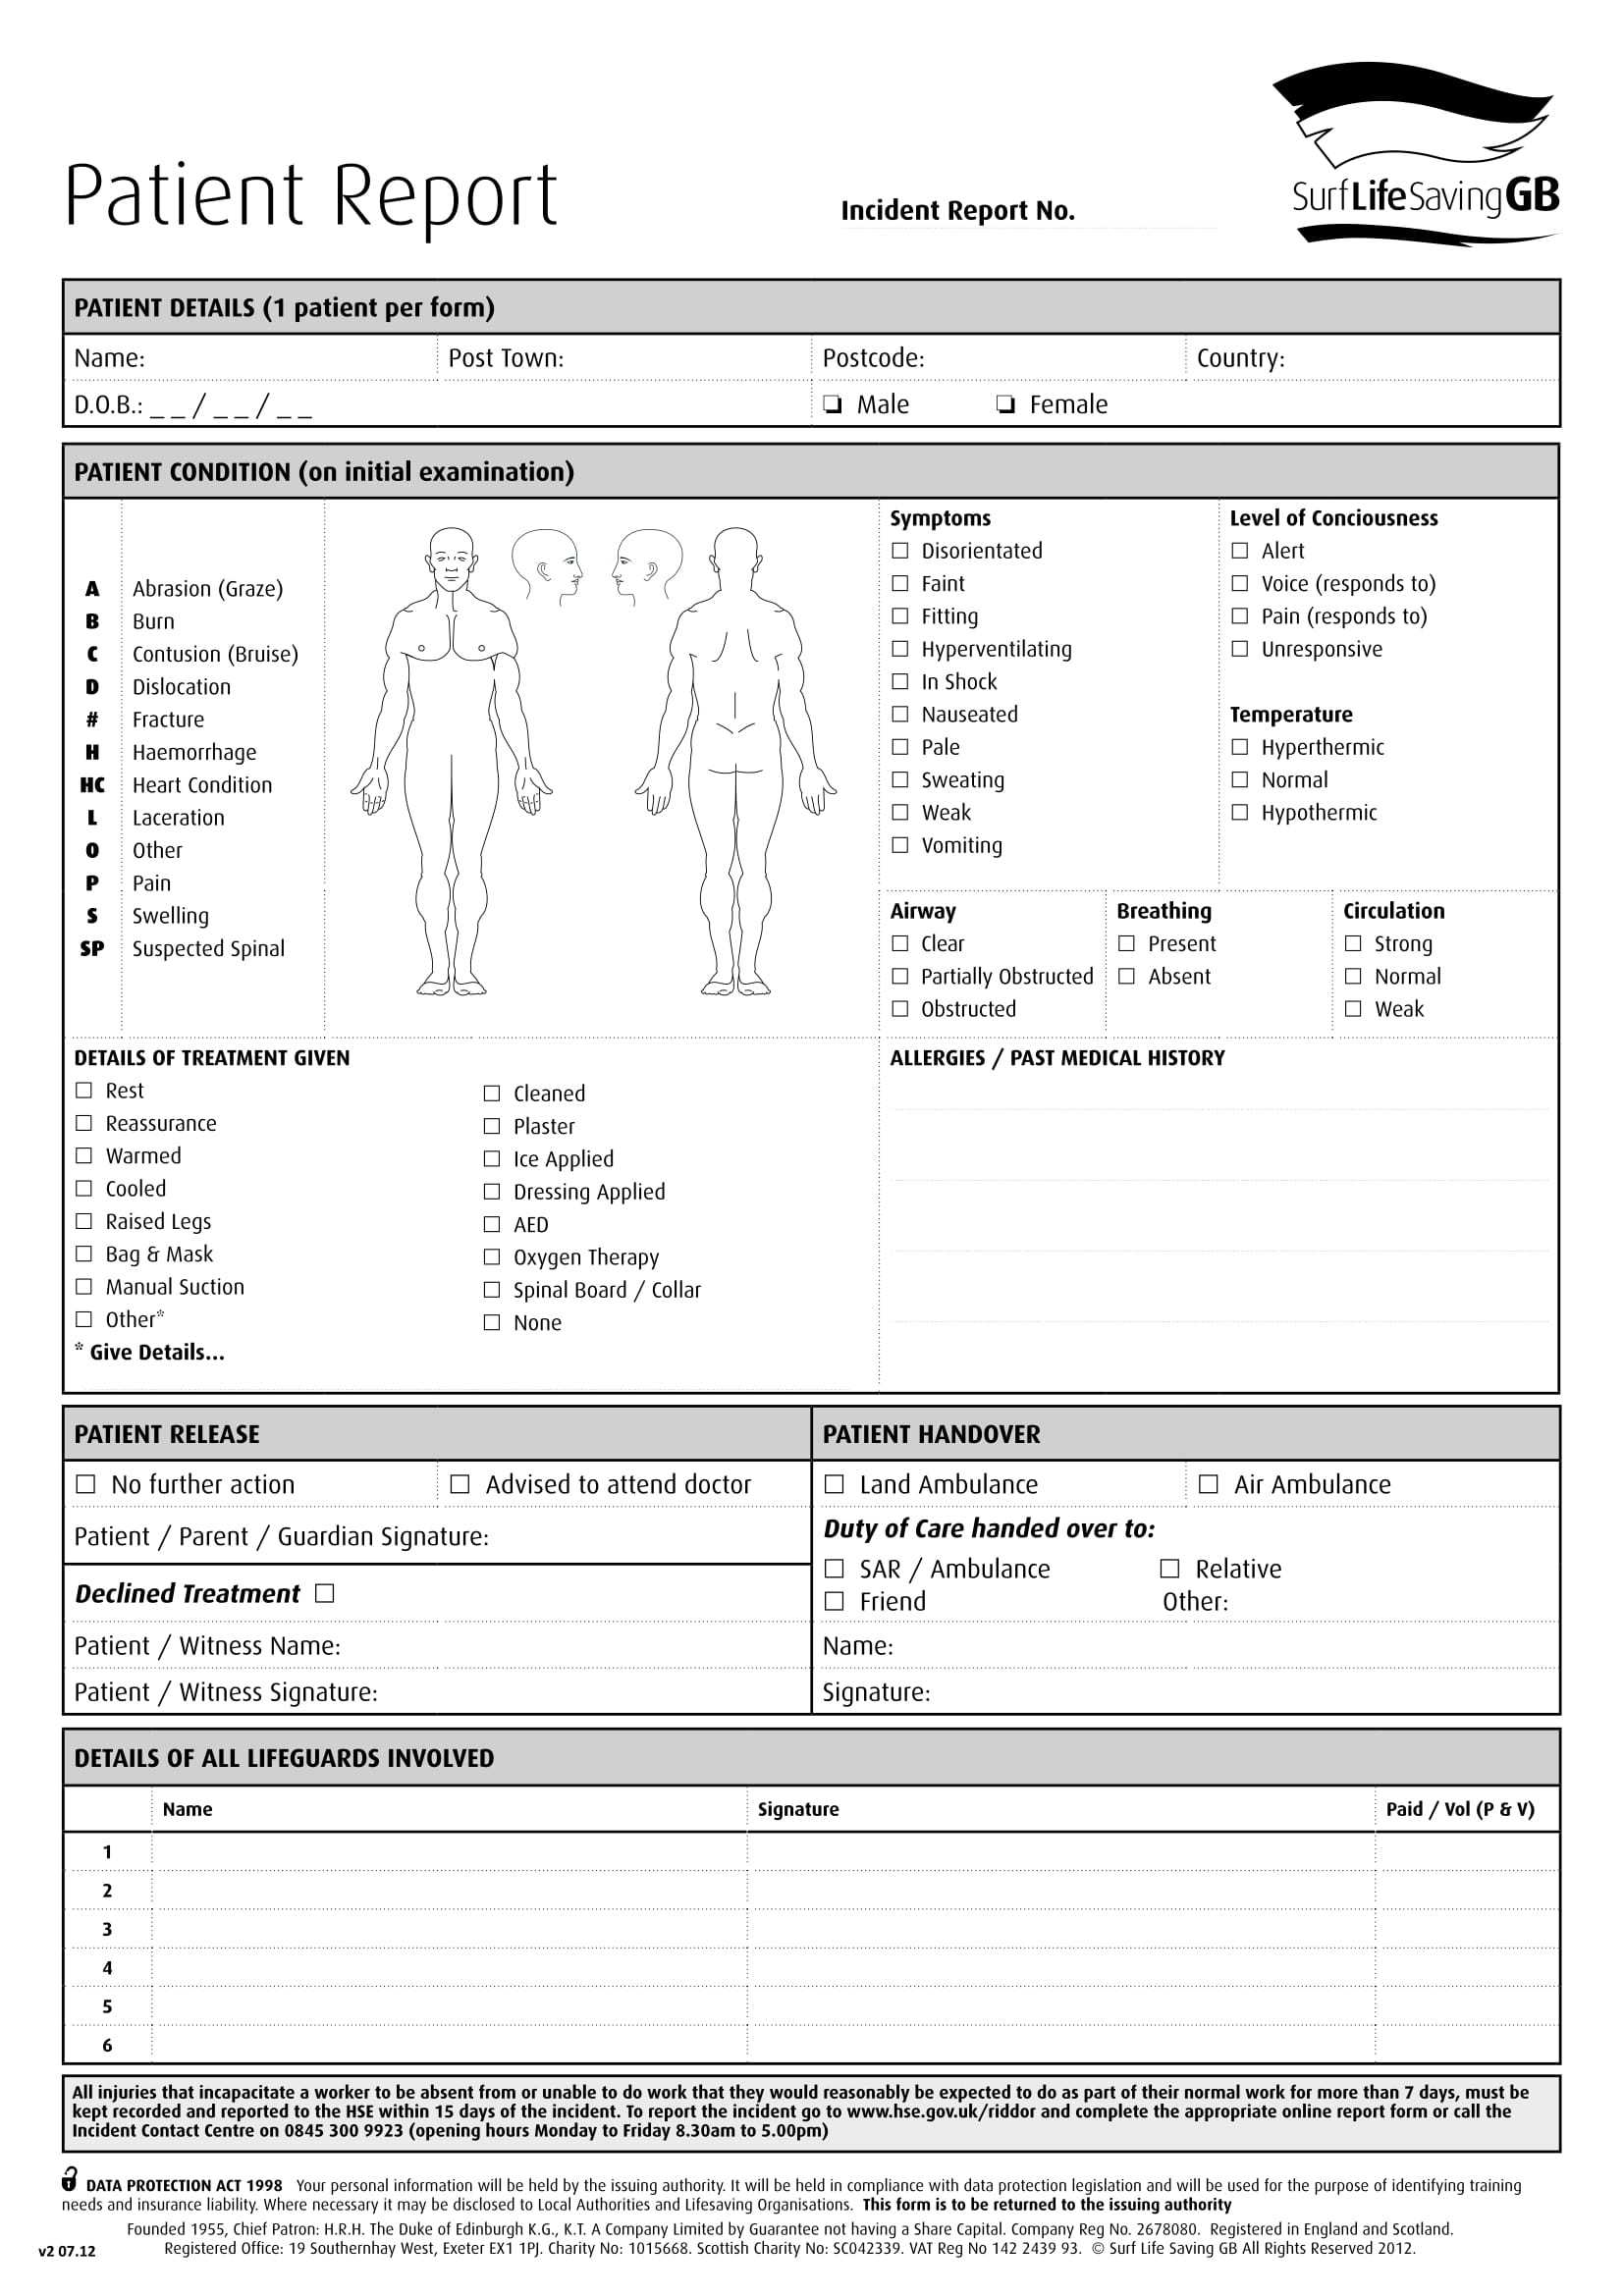 Free 14+ Patient Report Forms In Pdf | Ms Word With Generic Incident Report Template